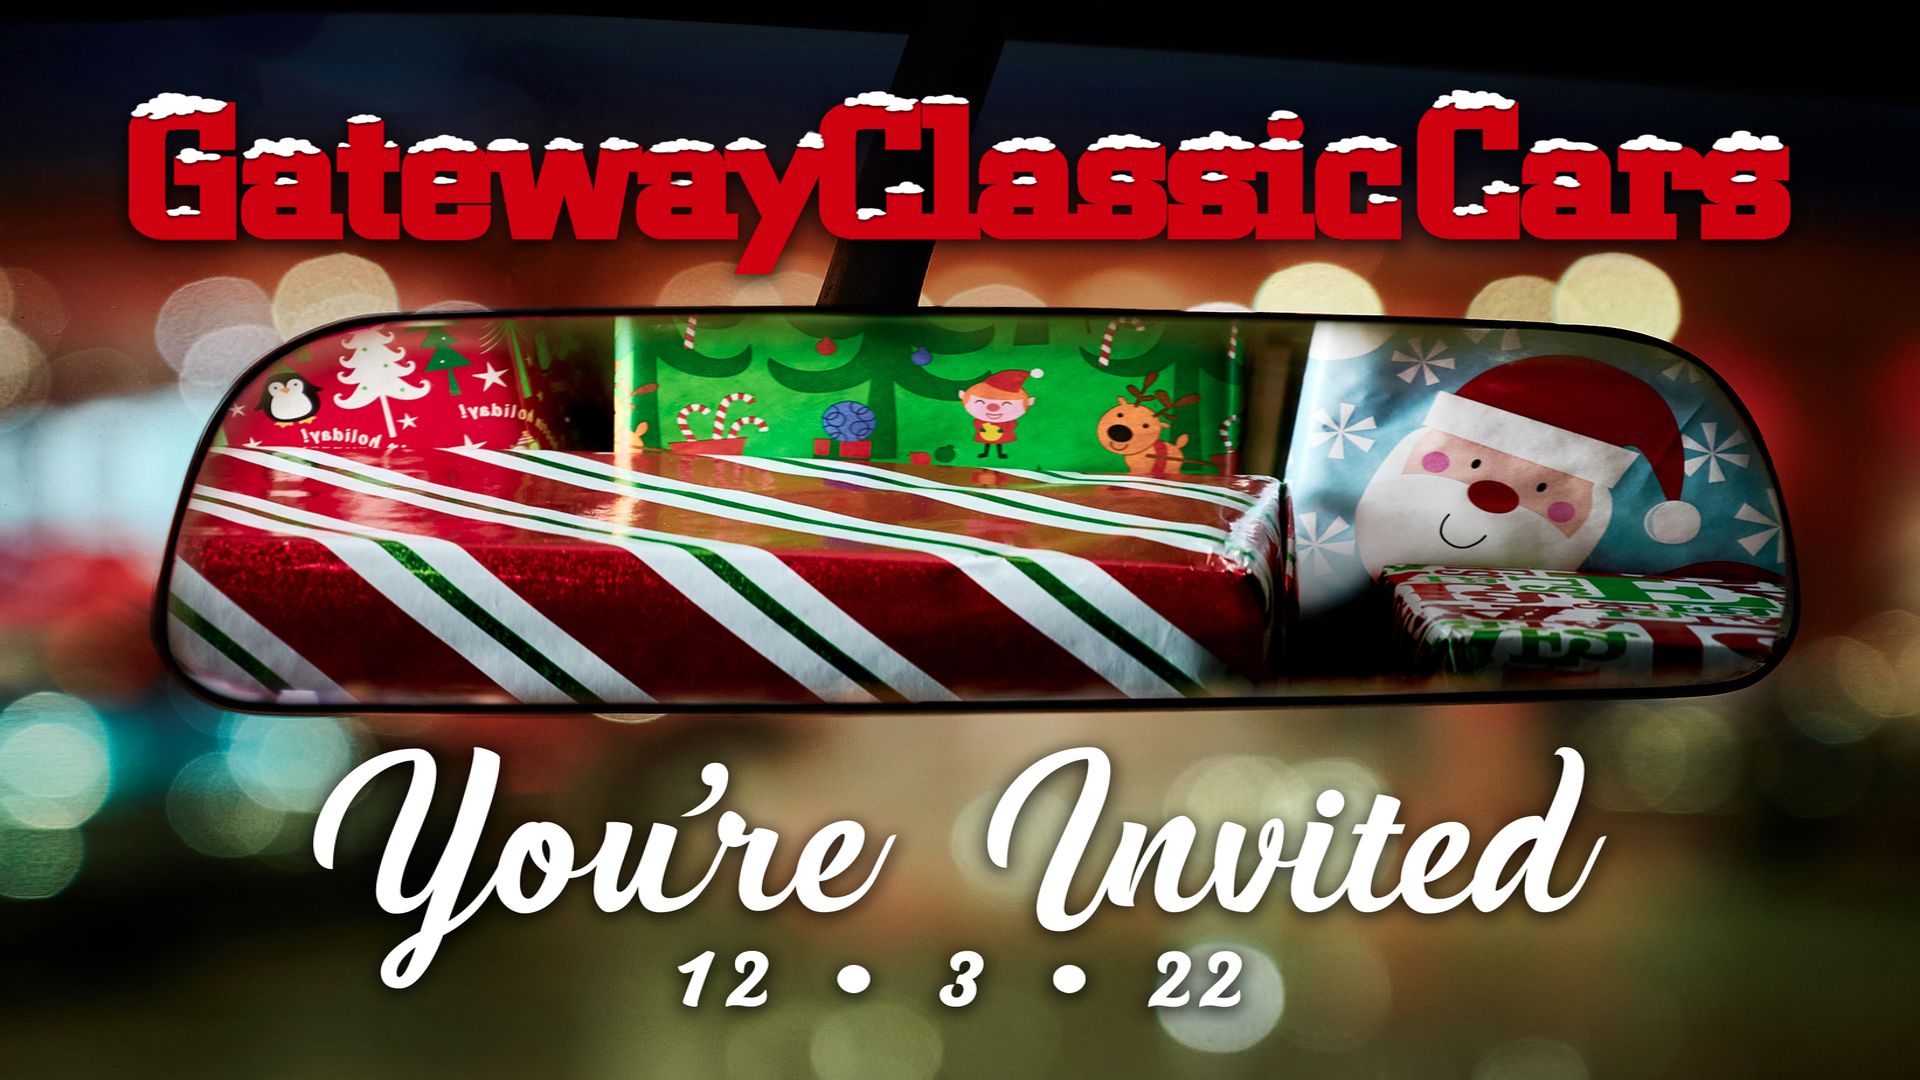 Gateway Classic Cars of Dallas - Holiday Party, Grapevine, Texas, United States